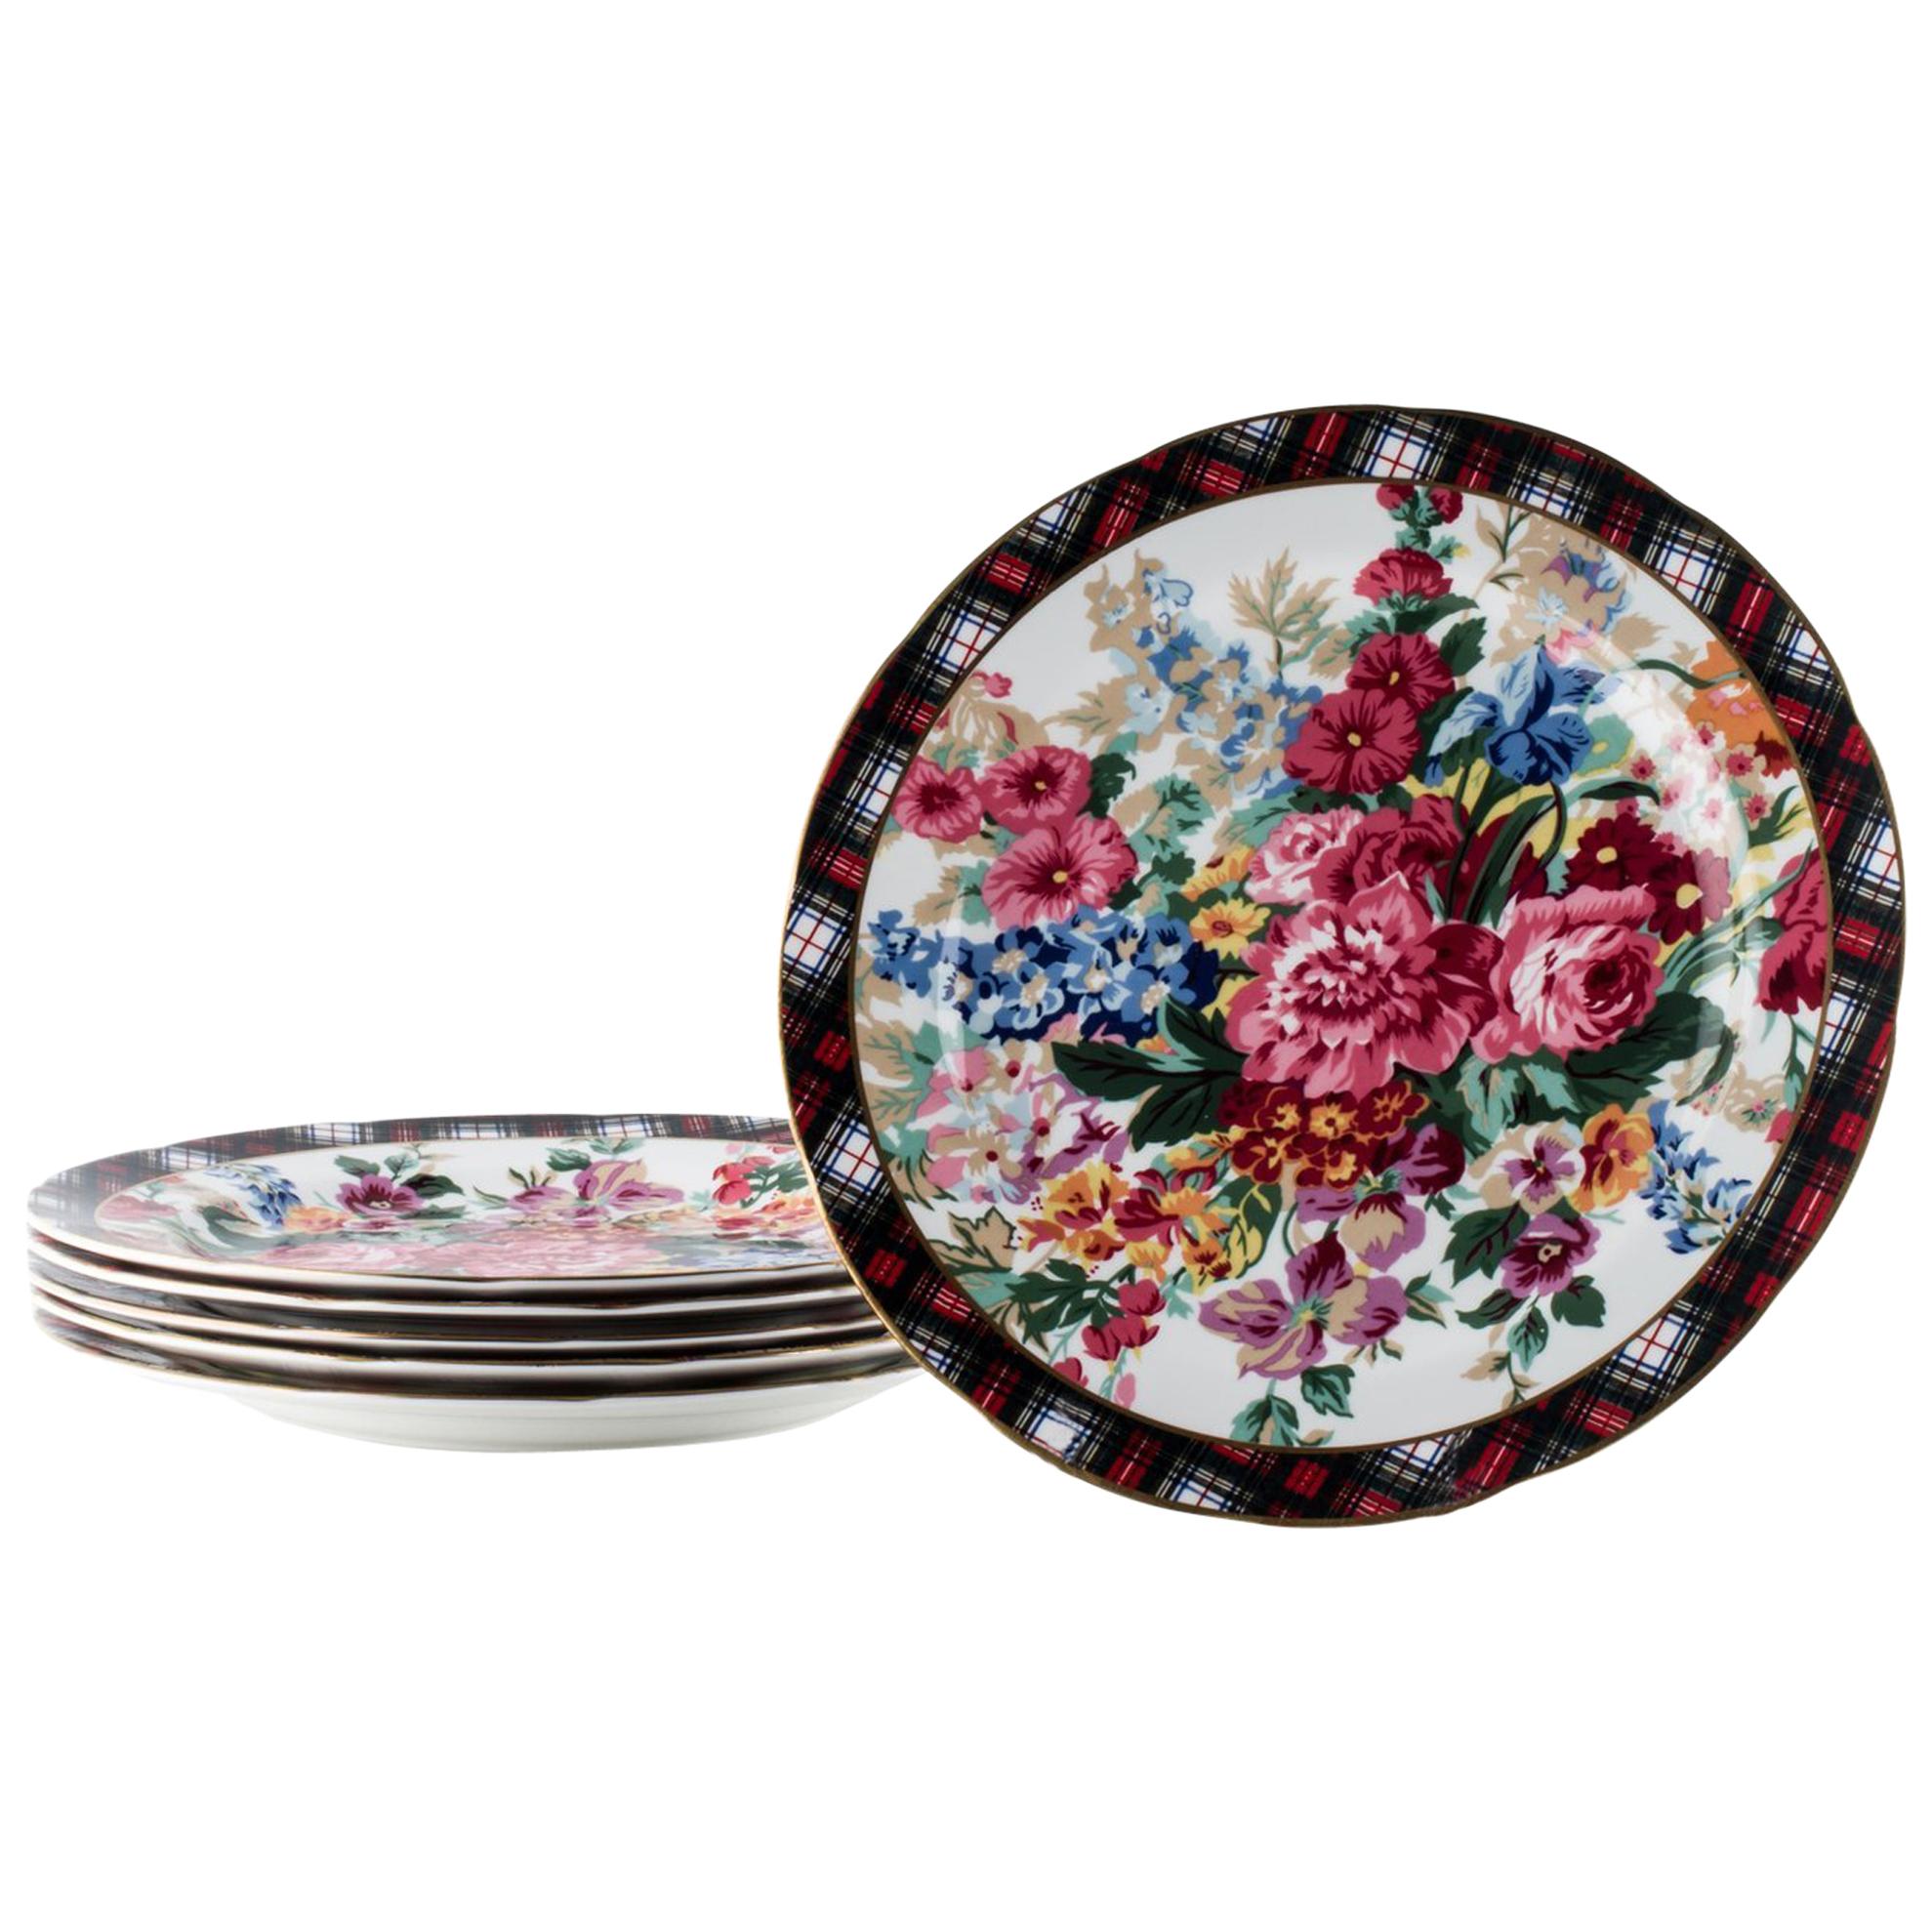 Set of 8 Place Settings in Hampton Floral by Ralph Lauren Home